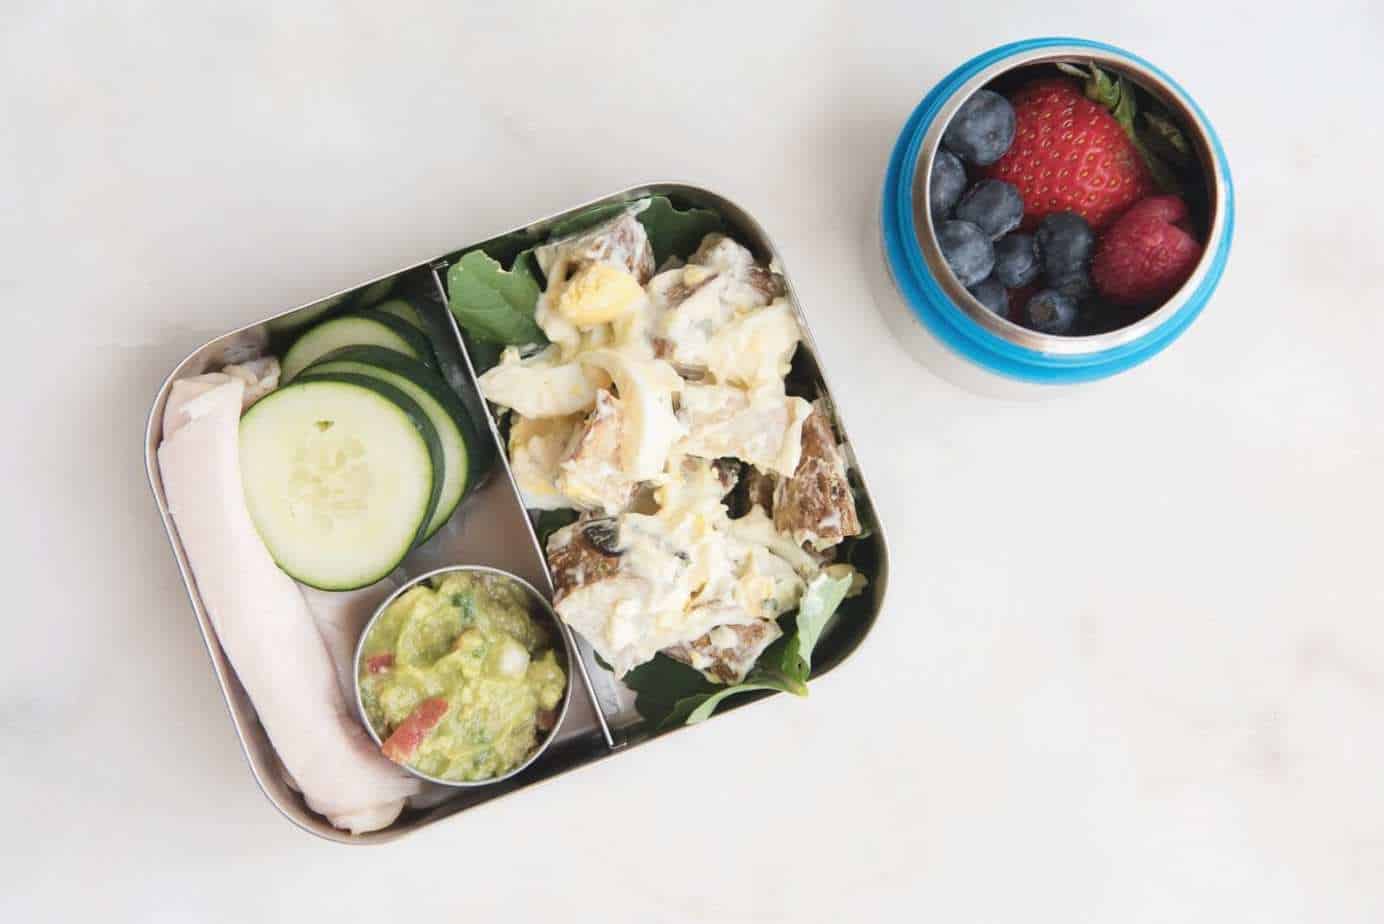 Healthy Lunches for kids